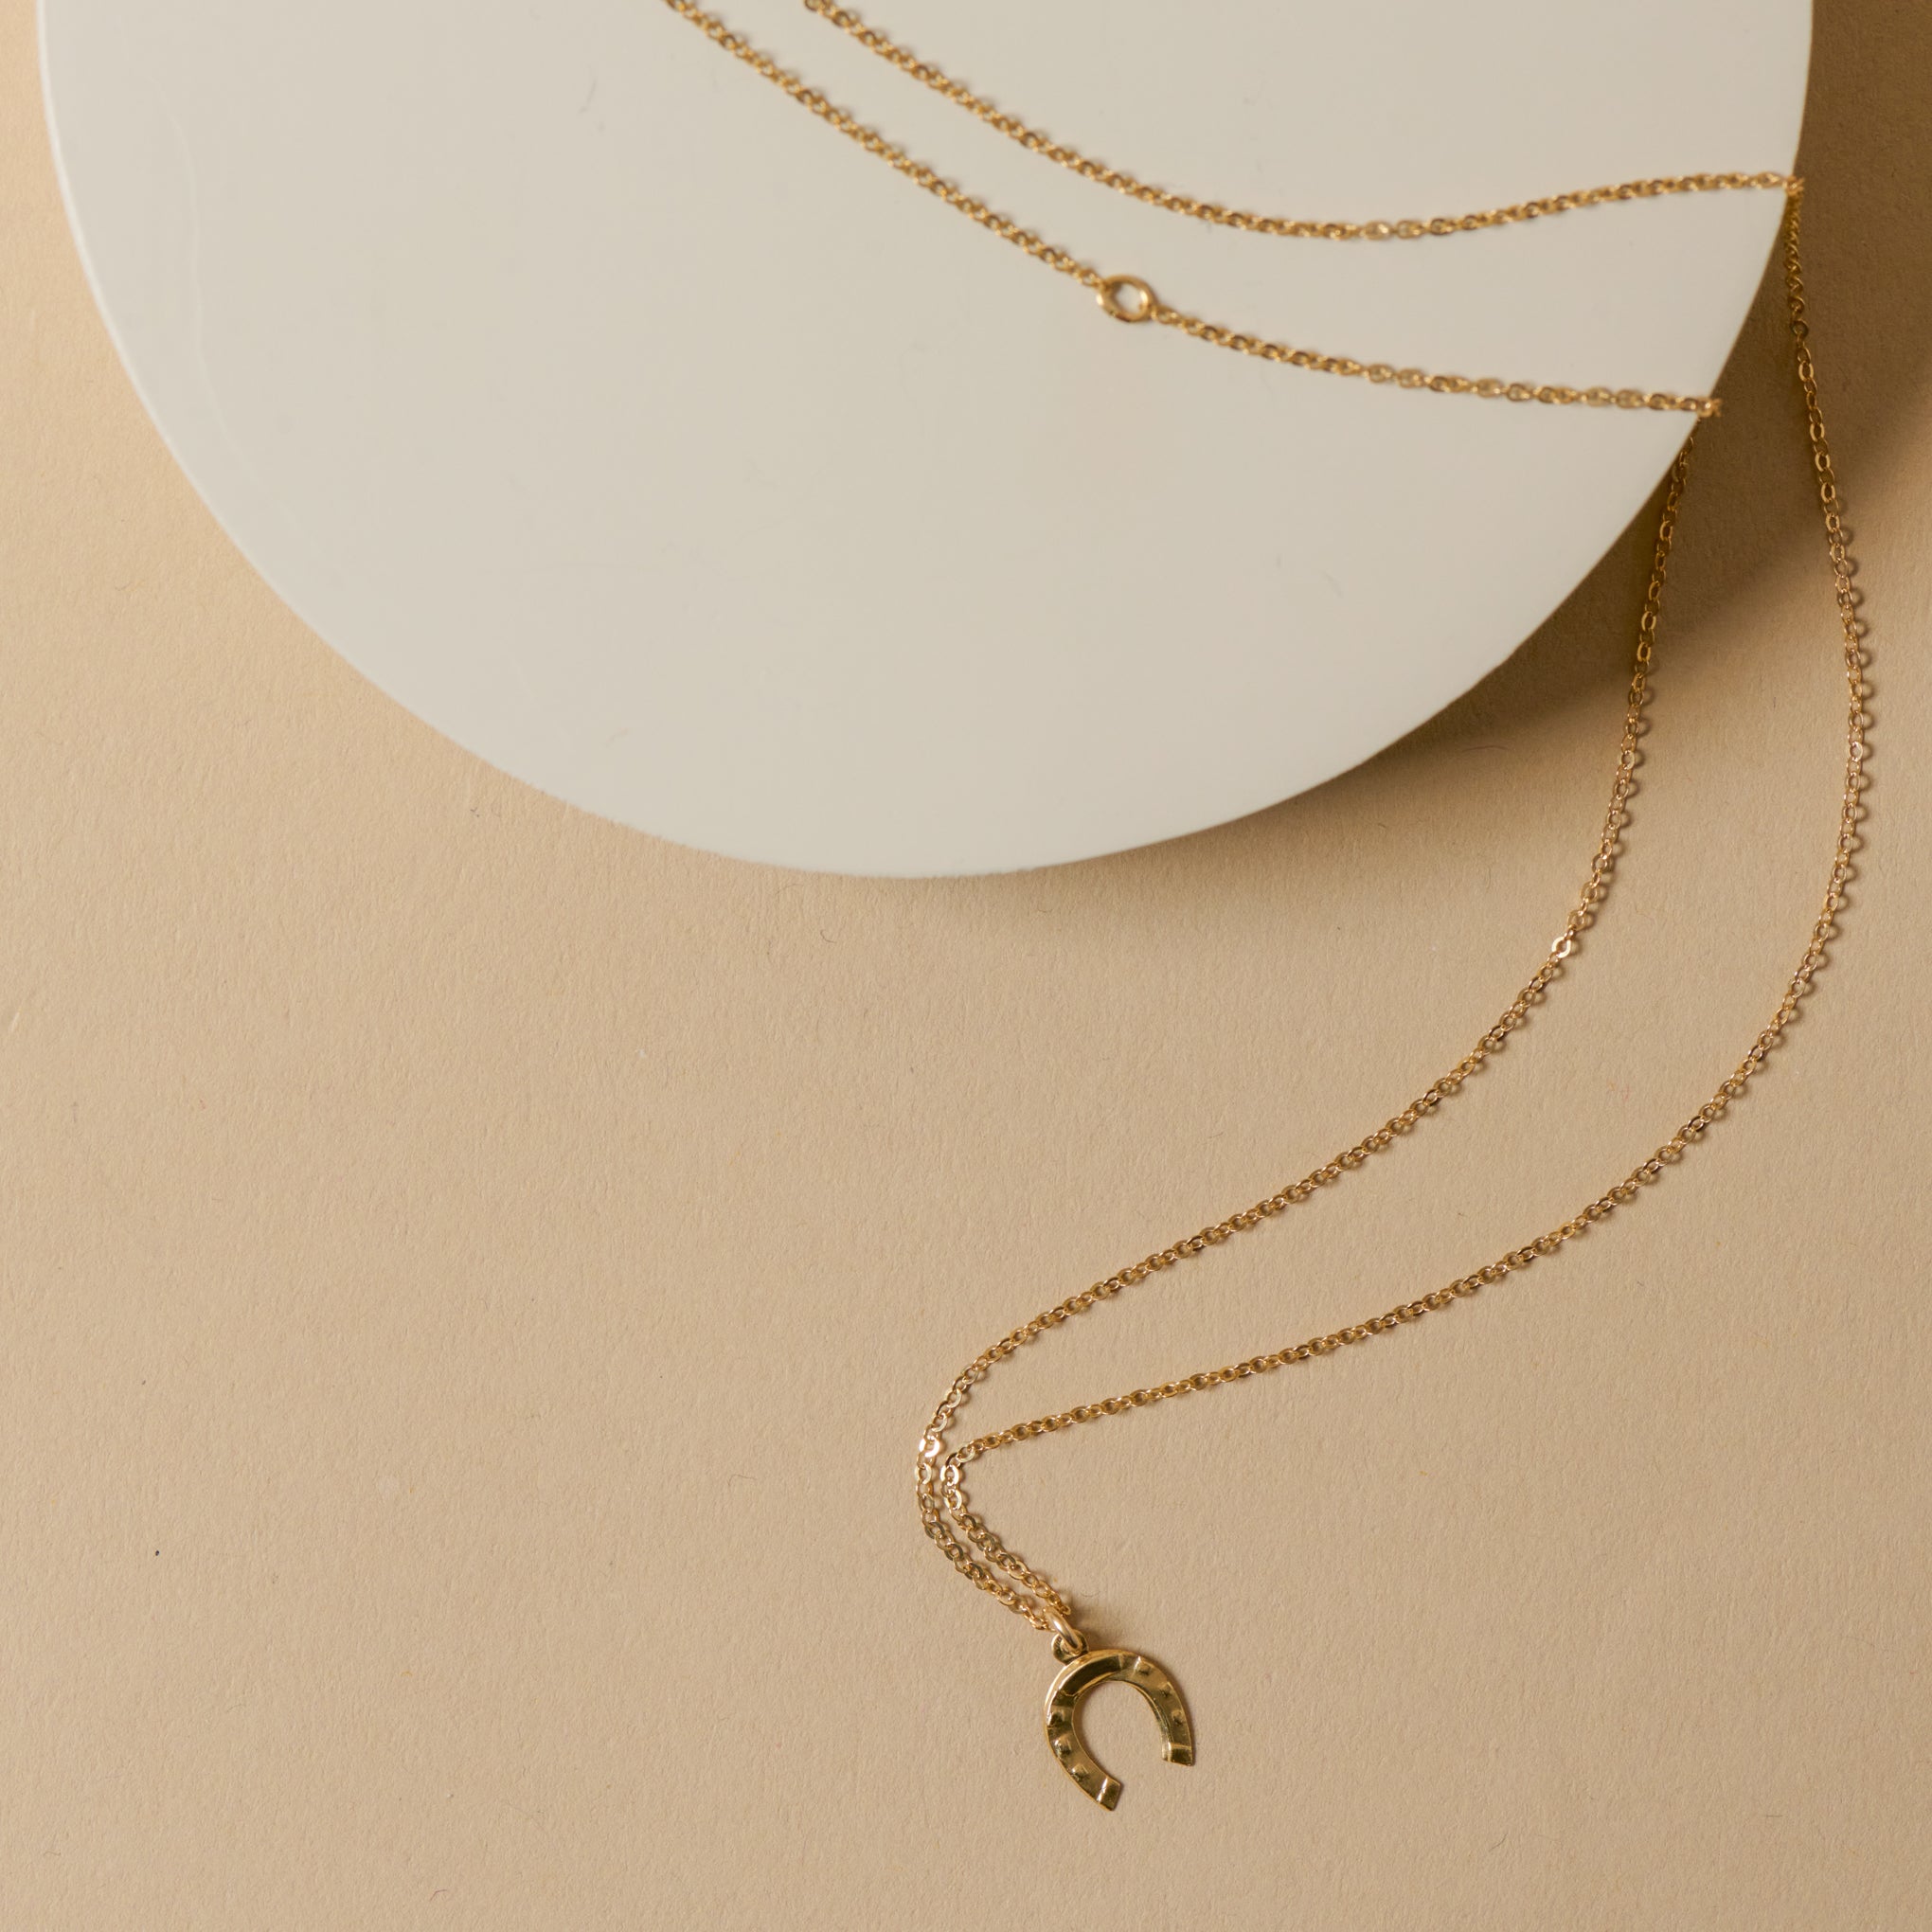 Serendipity Necklace On sale for $40.00, discounted from $50.00